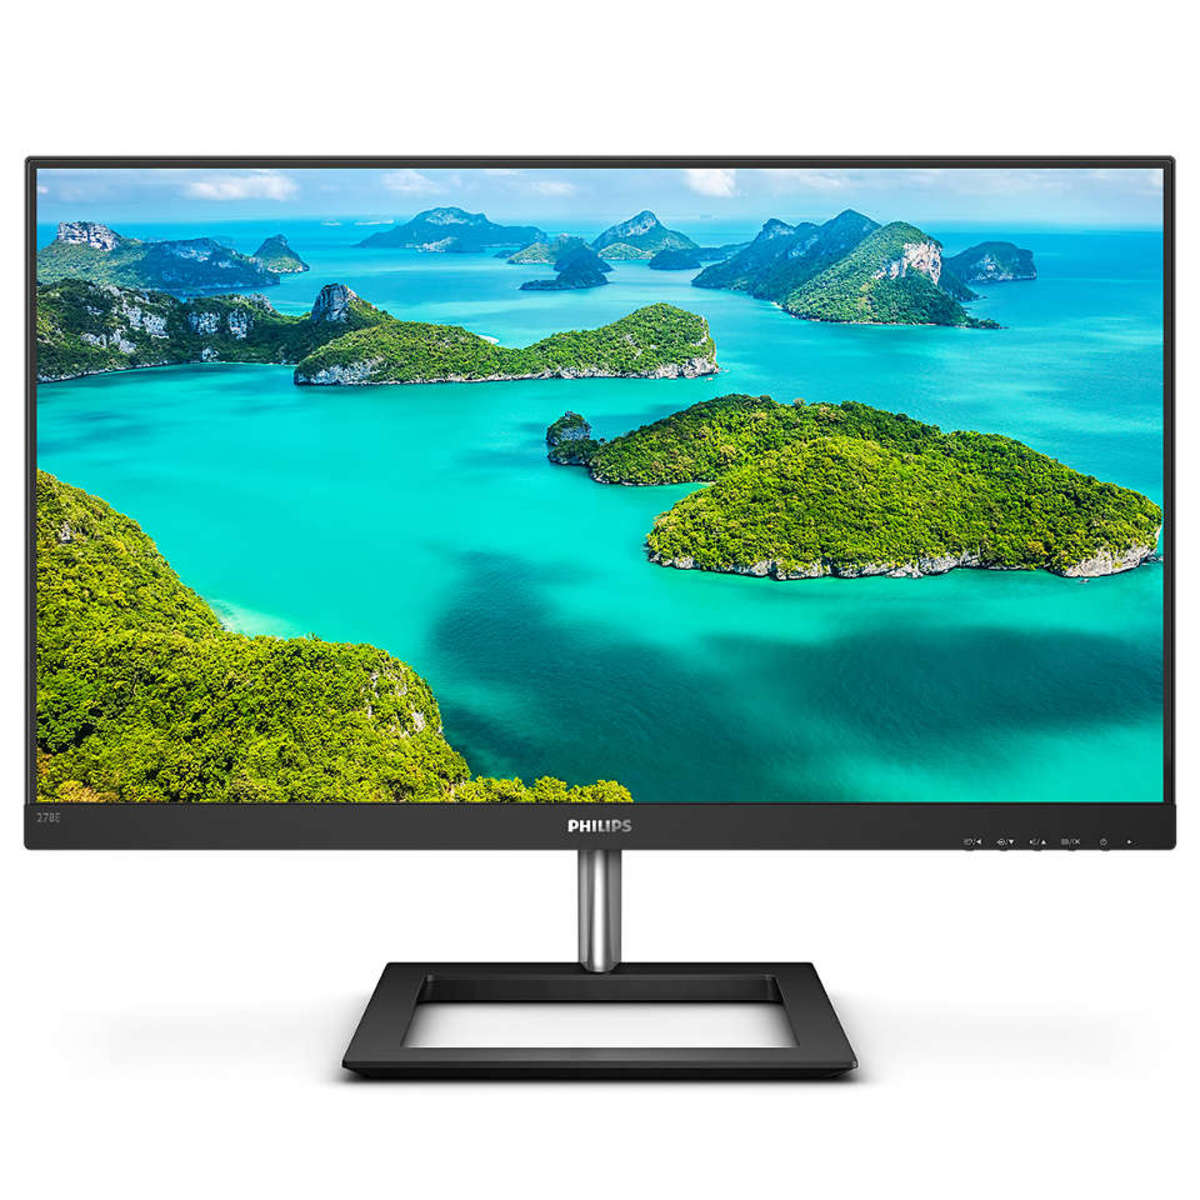 More about the K4 LED Monitor